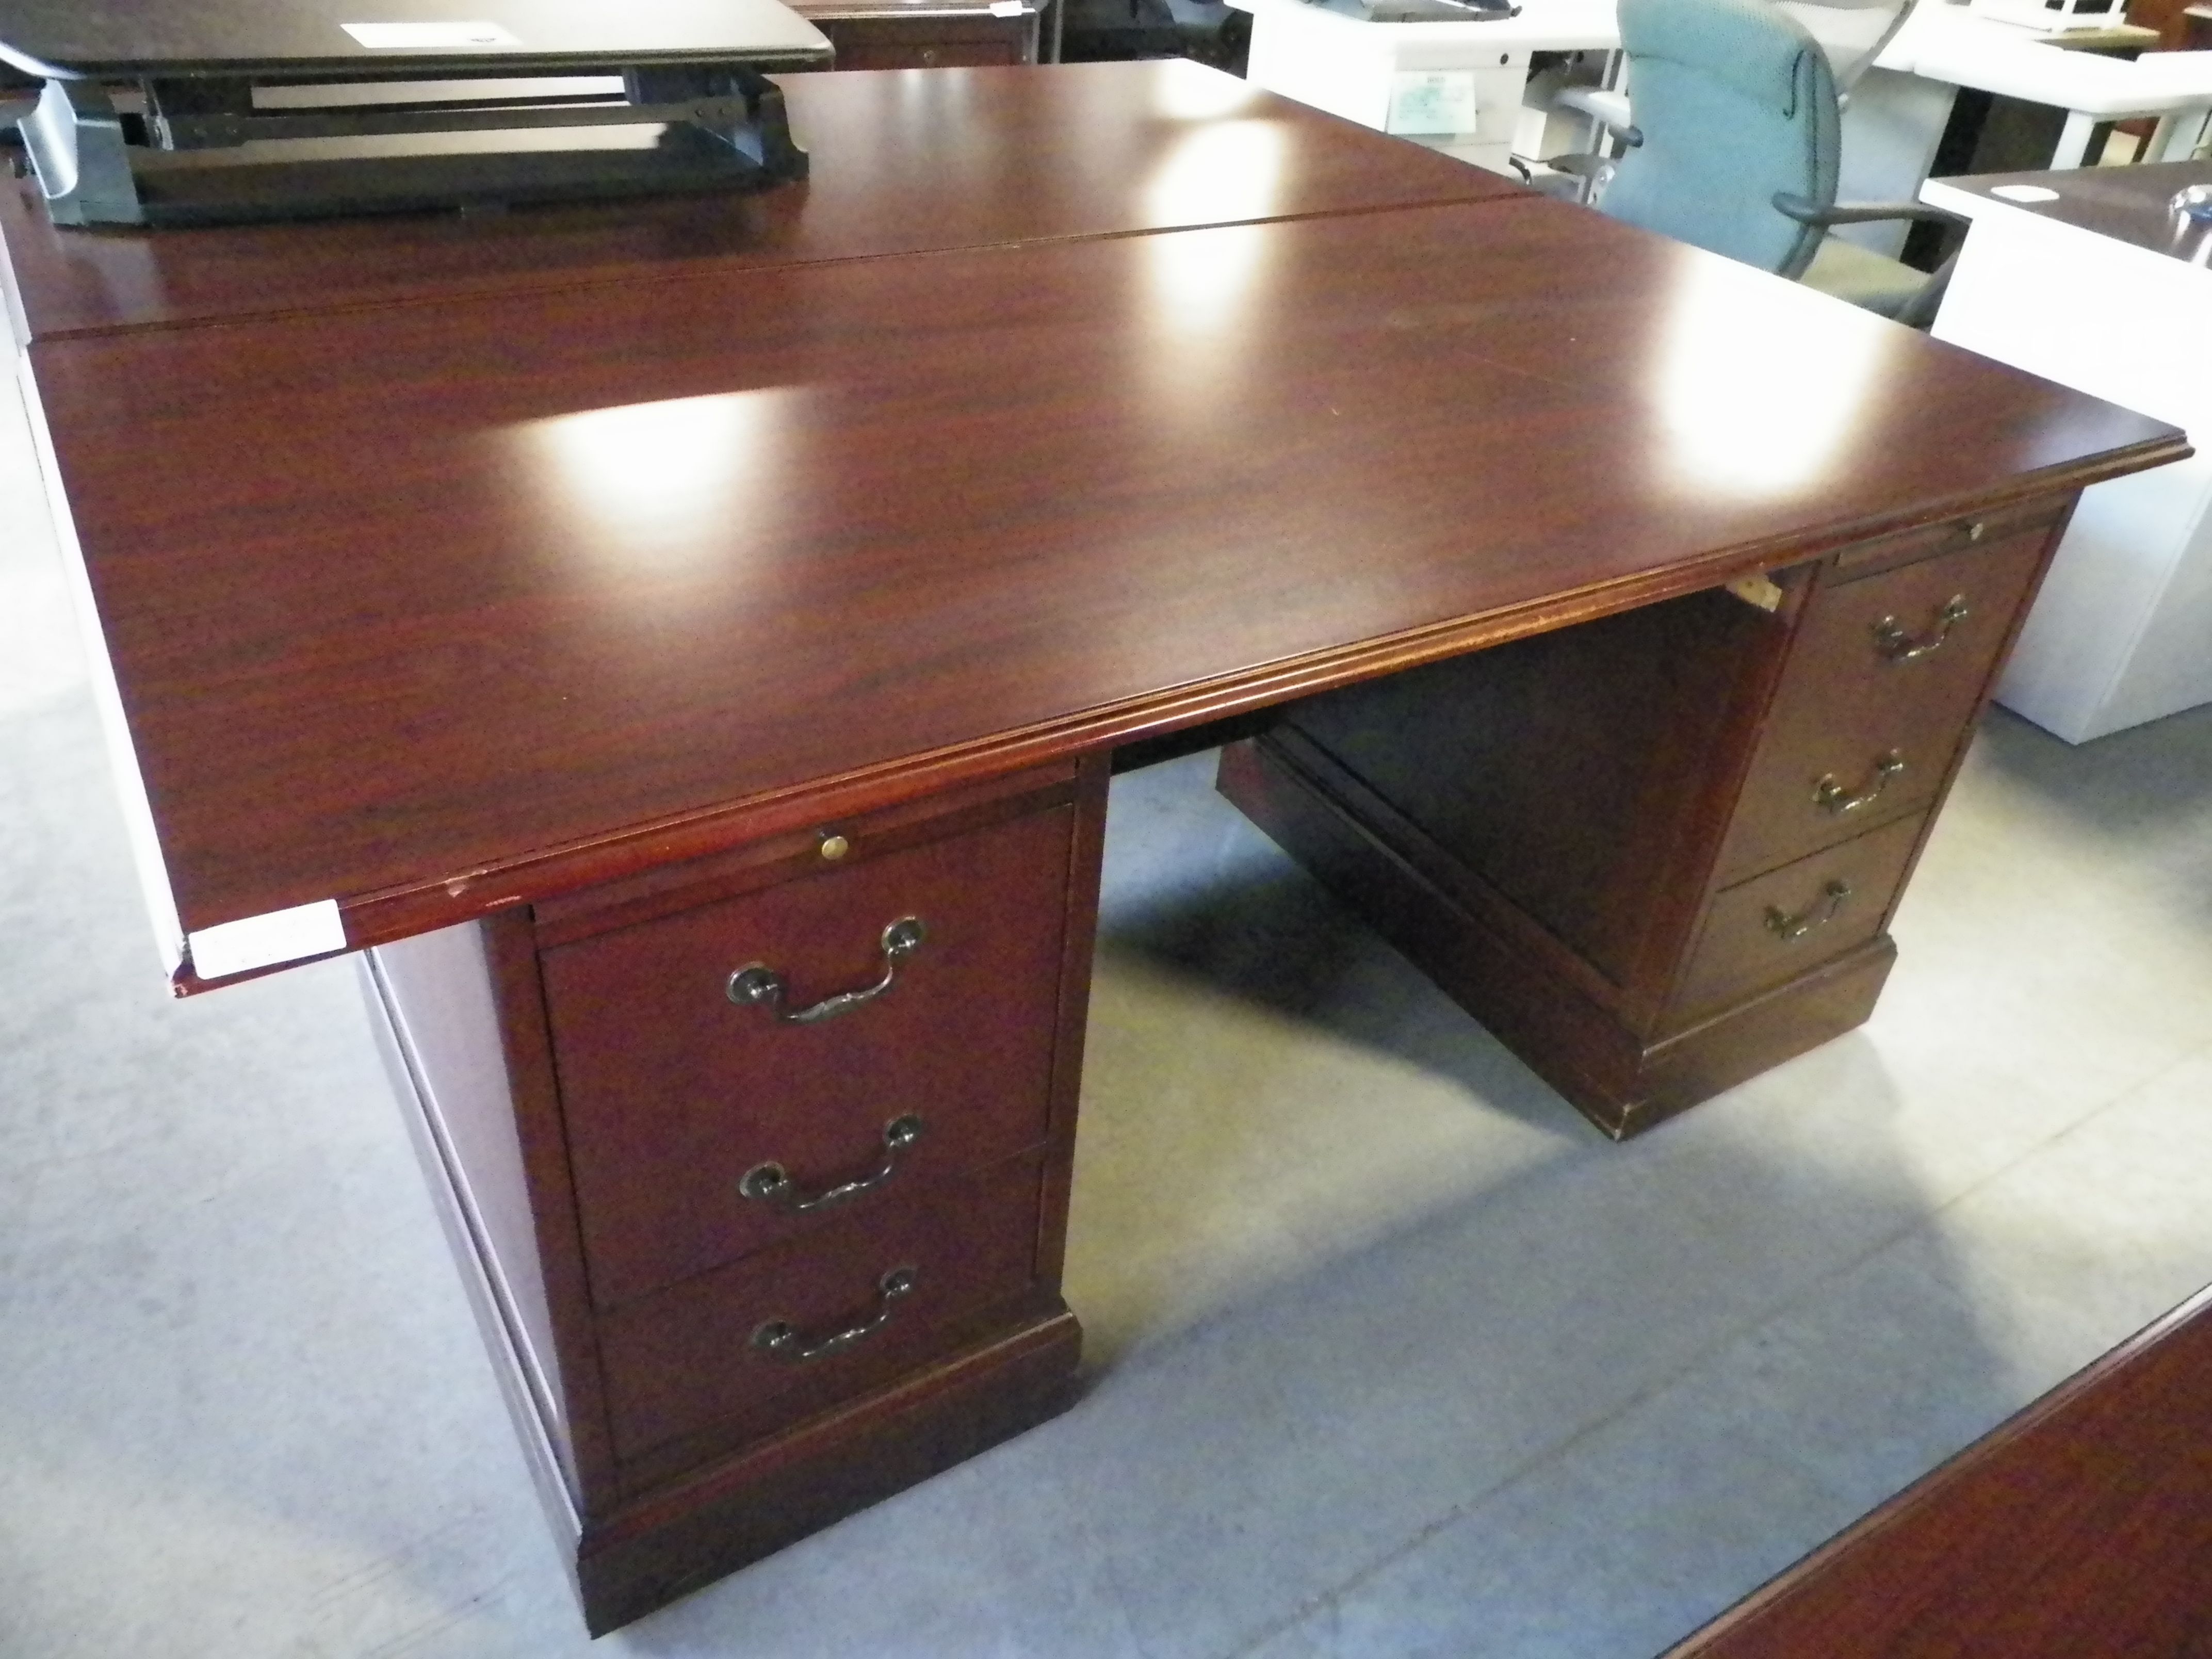 Used And Refurbished Office Furniture Tops Intended For Desk With Matching Bookcase (View 14 of 15)